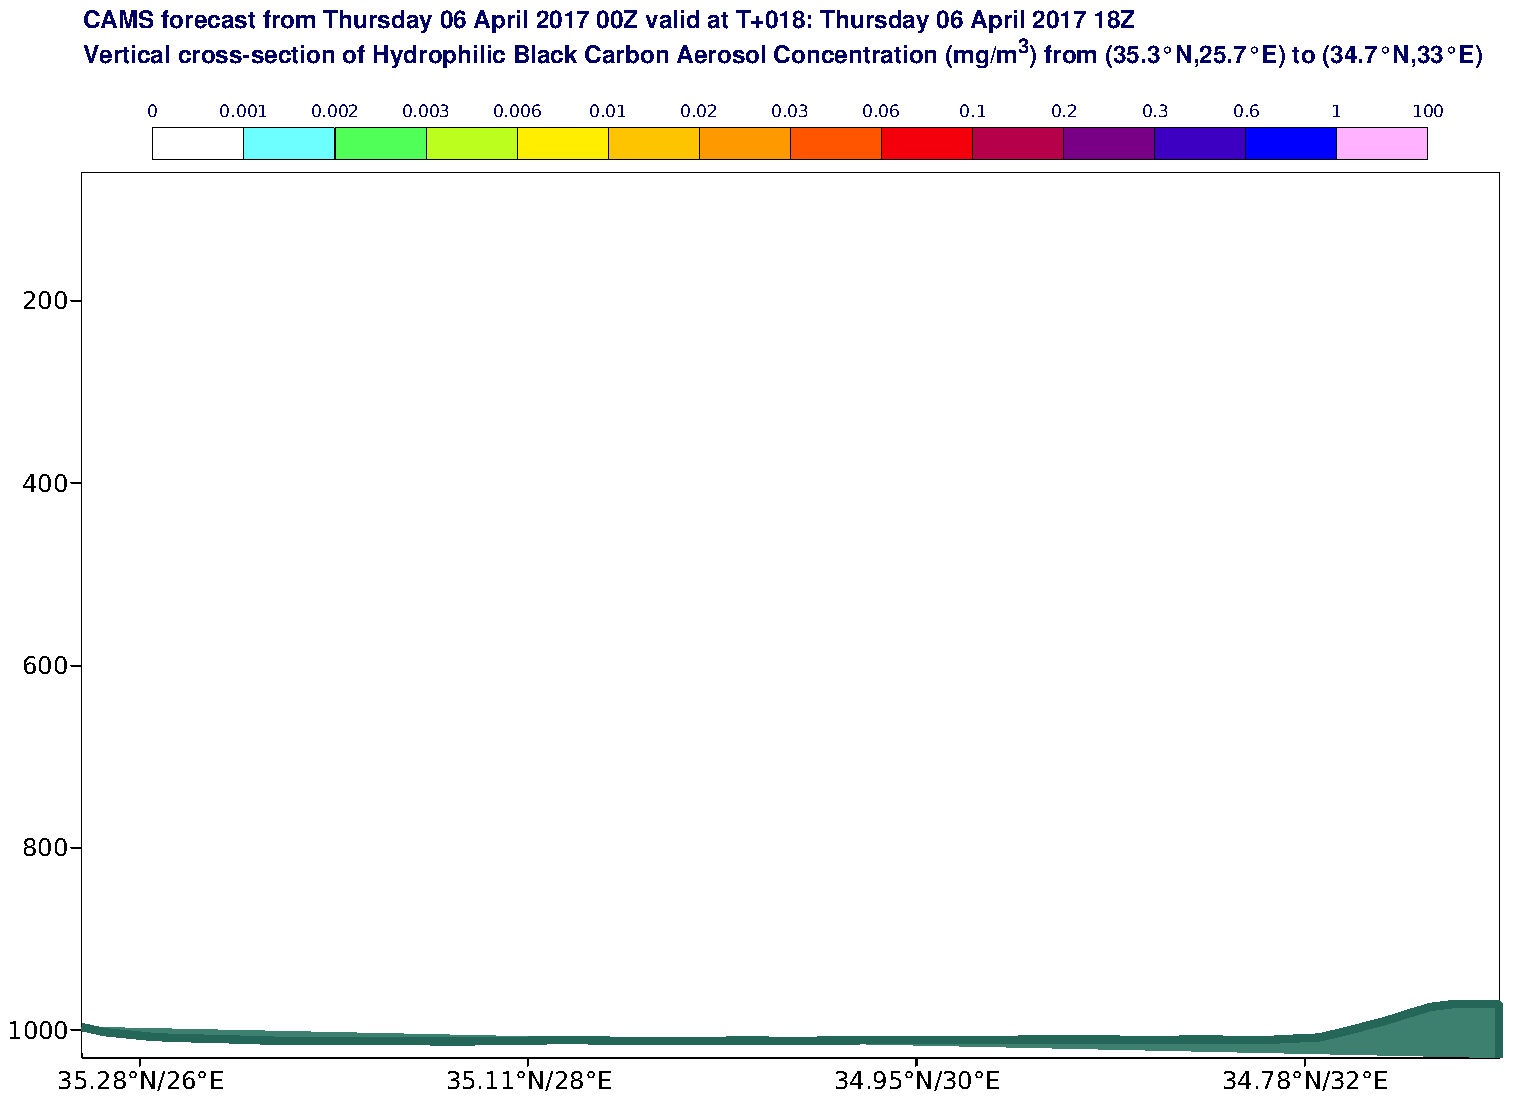 Vertical cross-section of Hydrophilic Black Carbon Aerosol Concentration (mg/m3) valid at T18 - 2017-04-06 18:00